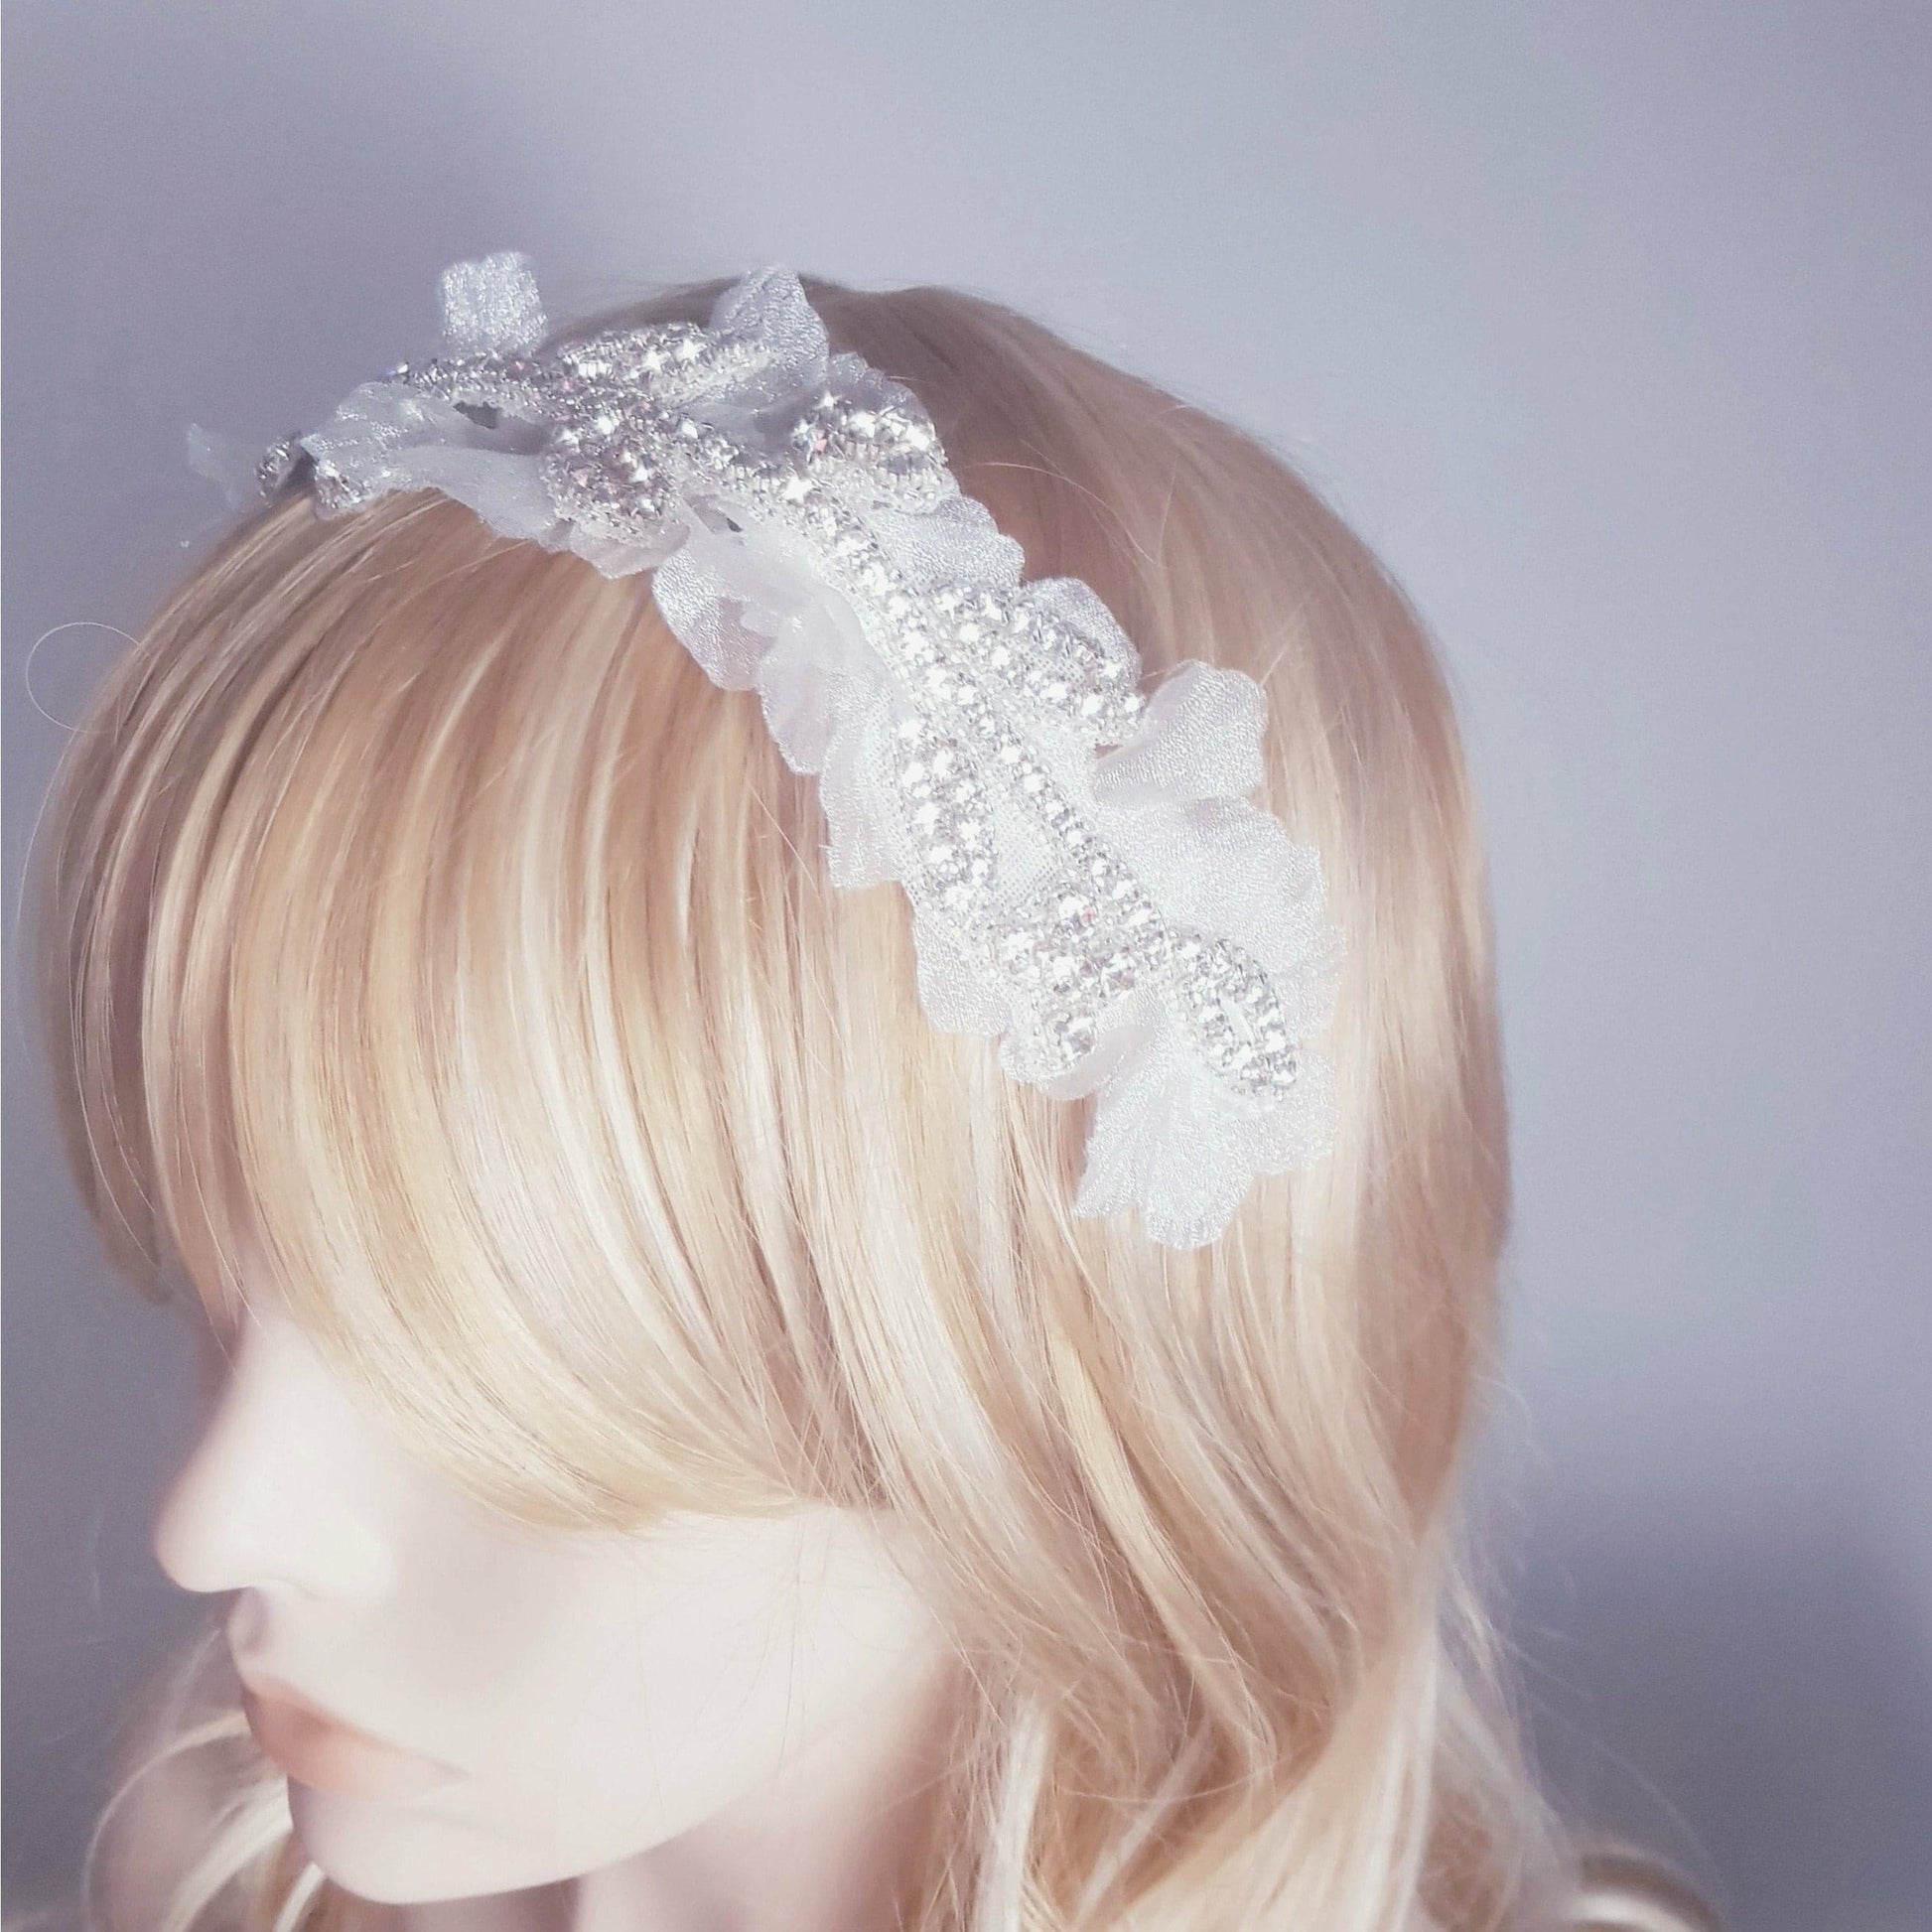 BoutiquebyBrendaLee LA FÉE Headband Jeweled White sheer organza fabric headpieces hair accessories